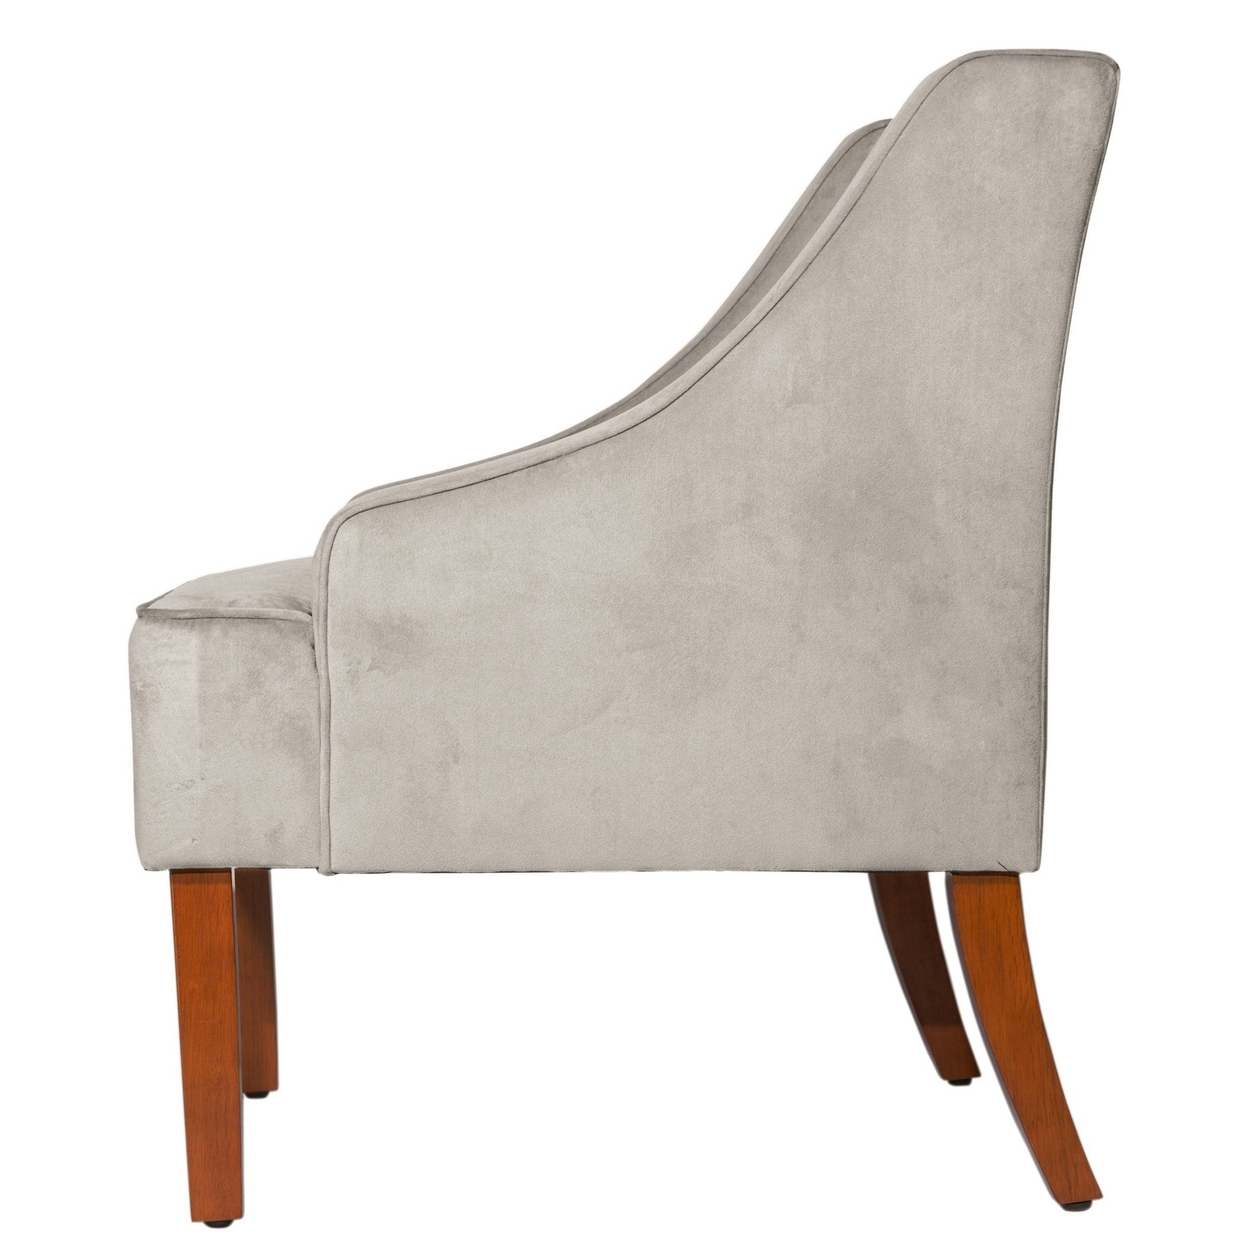 Velvet Fabric Upholstered Wooden Accent Chair With Swooping Armrests, Gray And Brown- Saltoro Sherpi